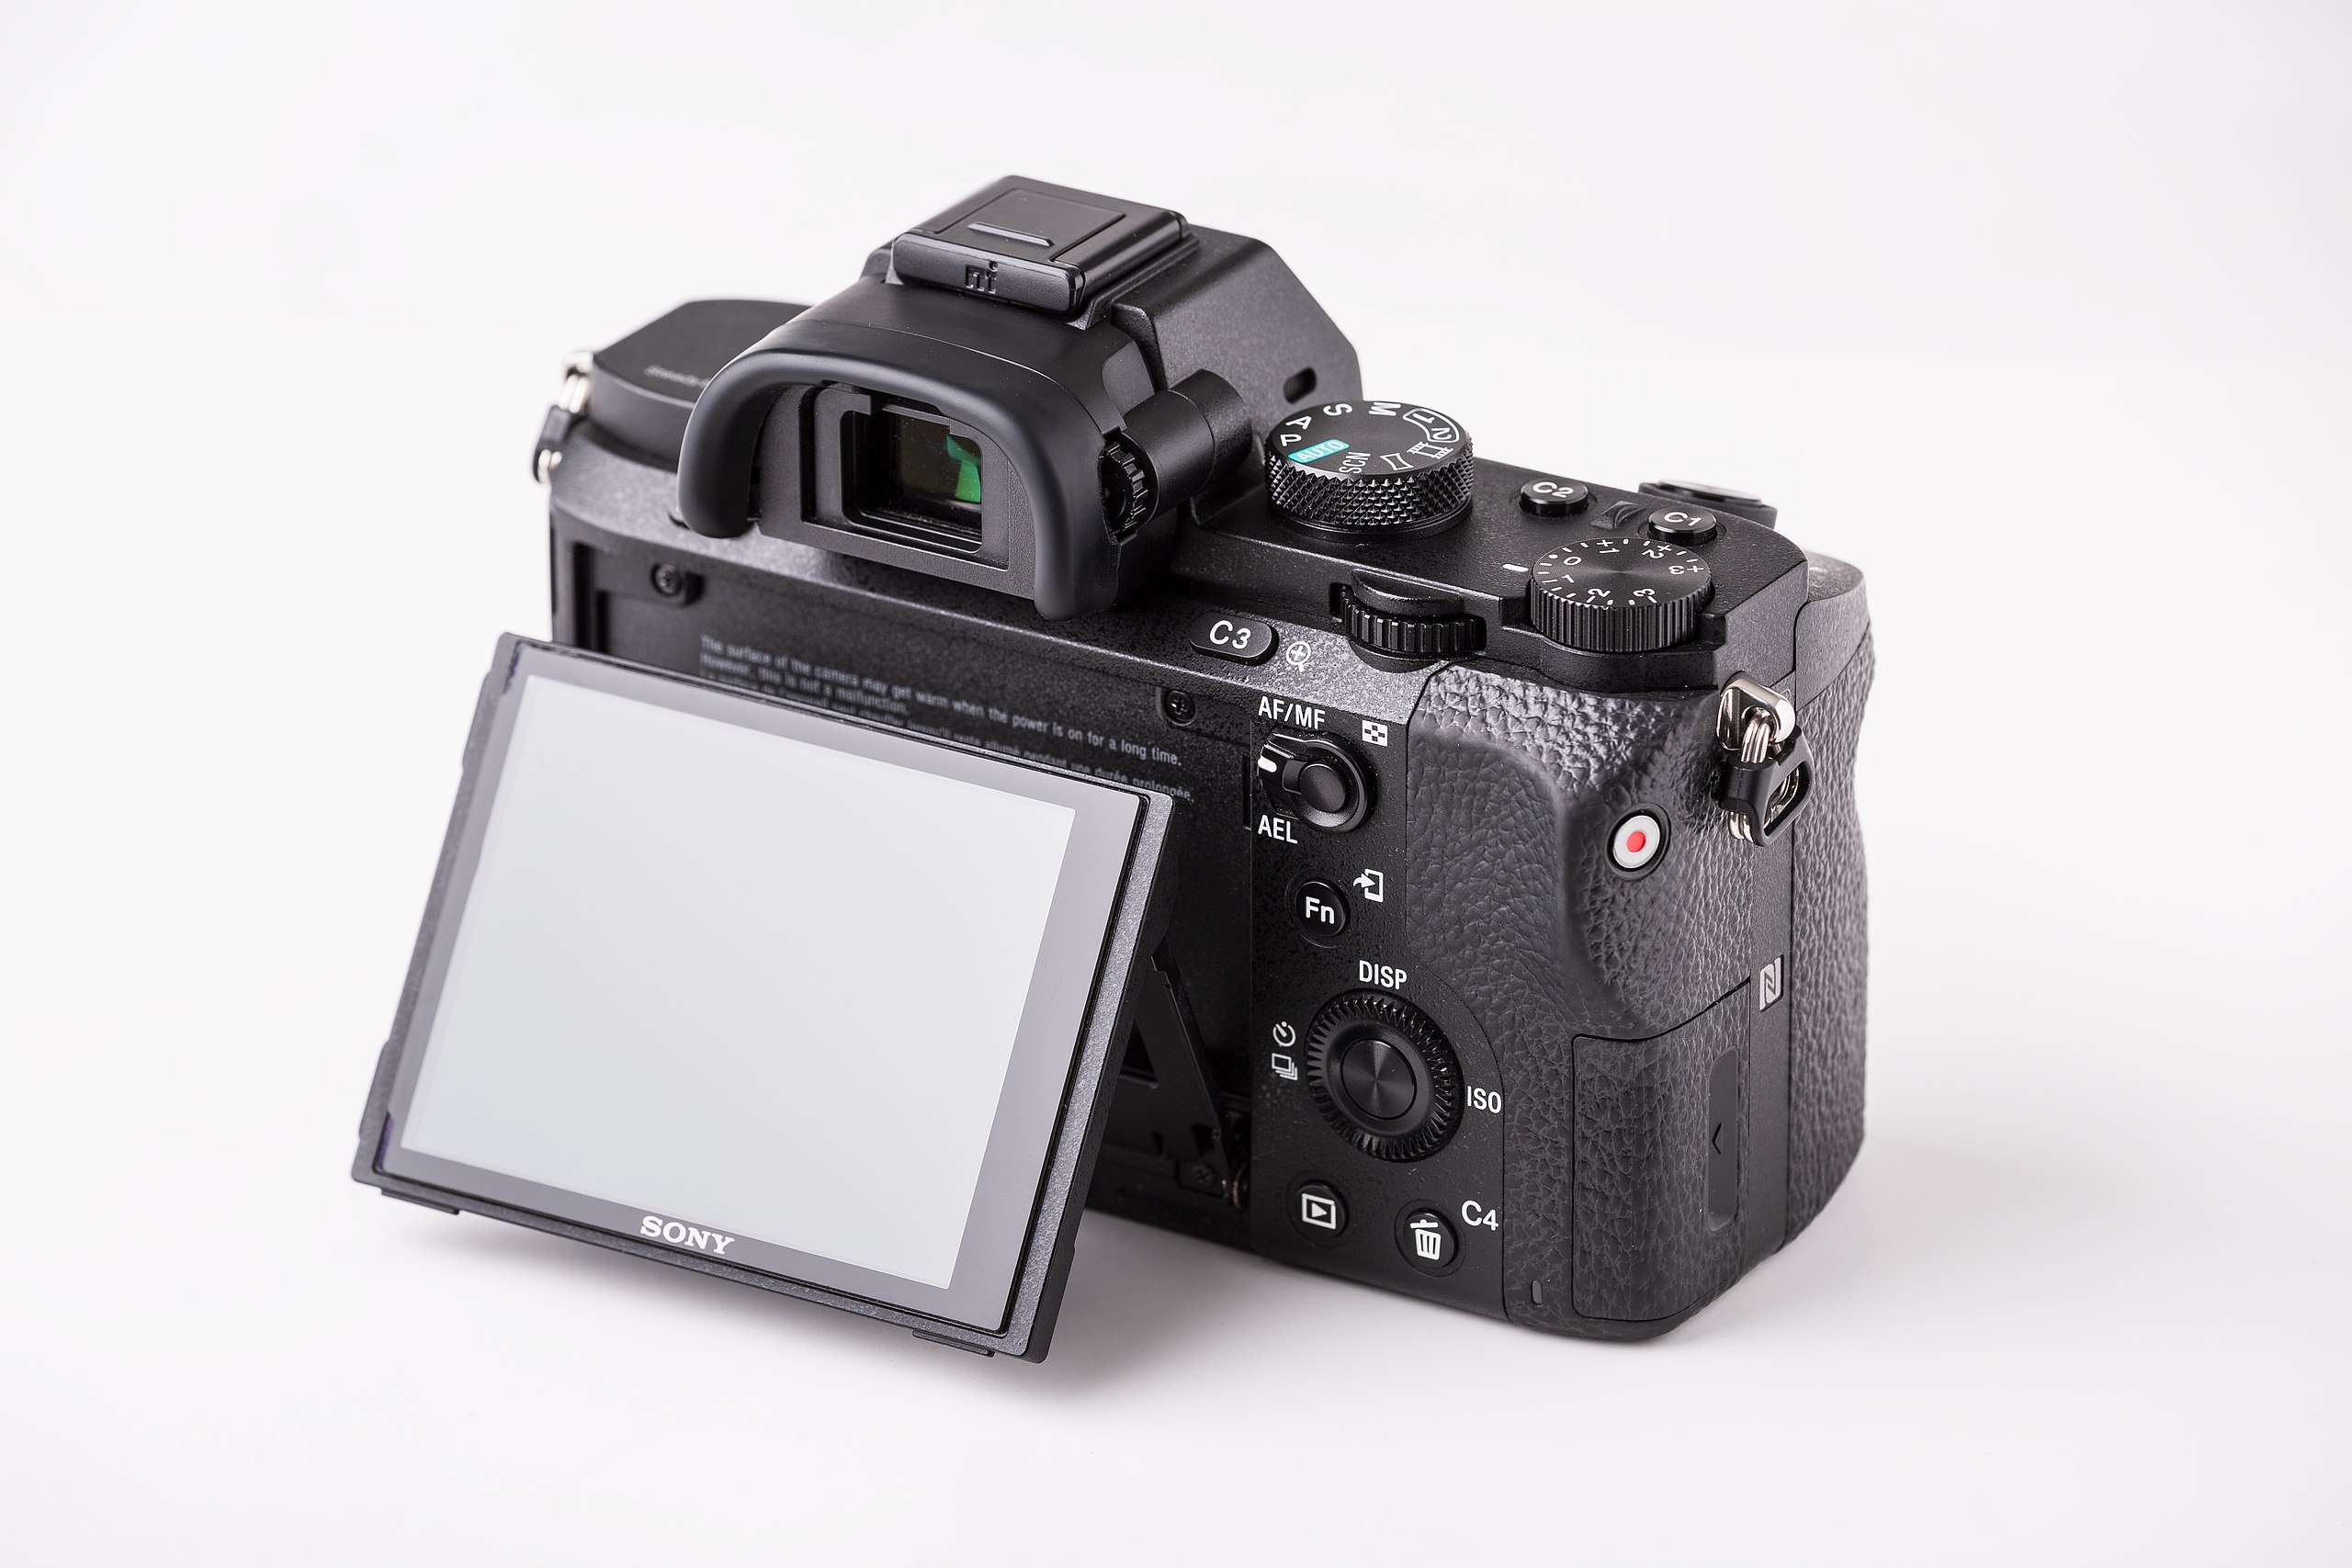 File:Sony A7II (ILCE-7M2) - rear view lateral.jpg - Wikimedia Commons